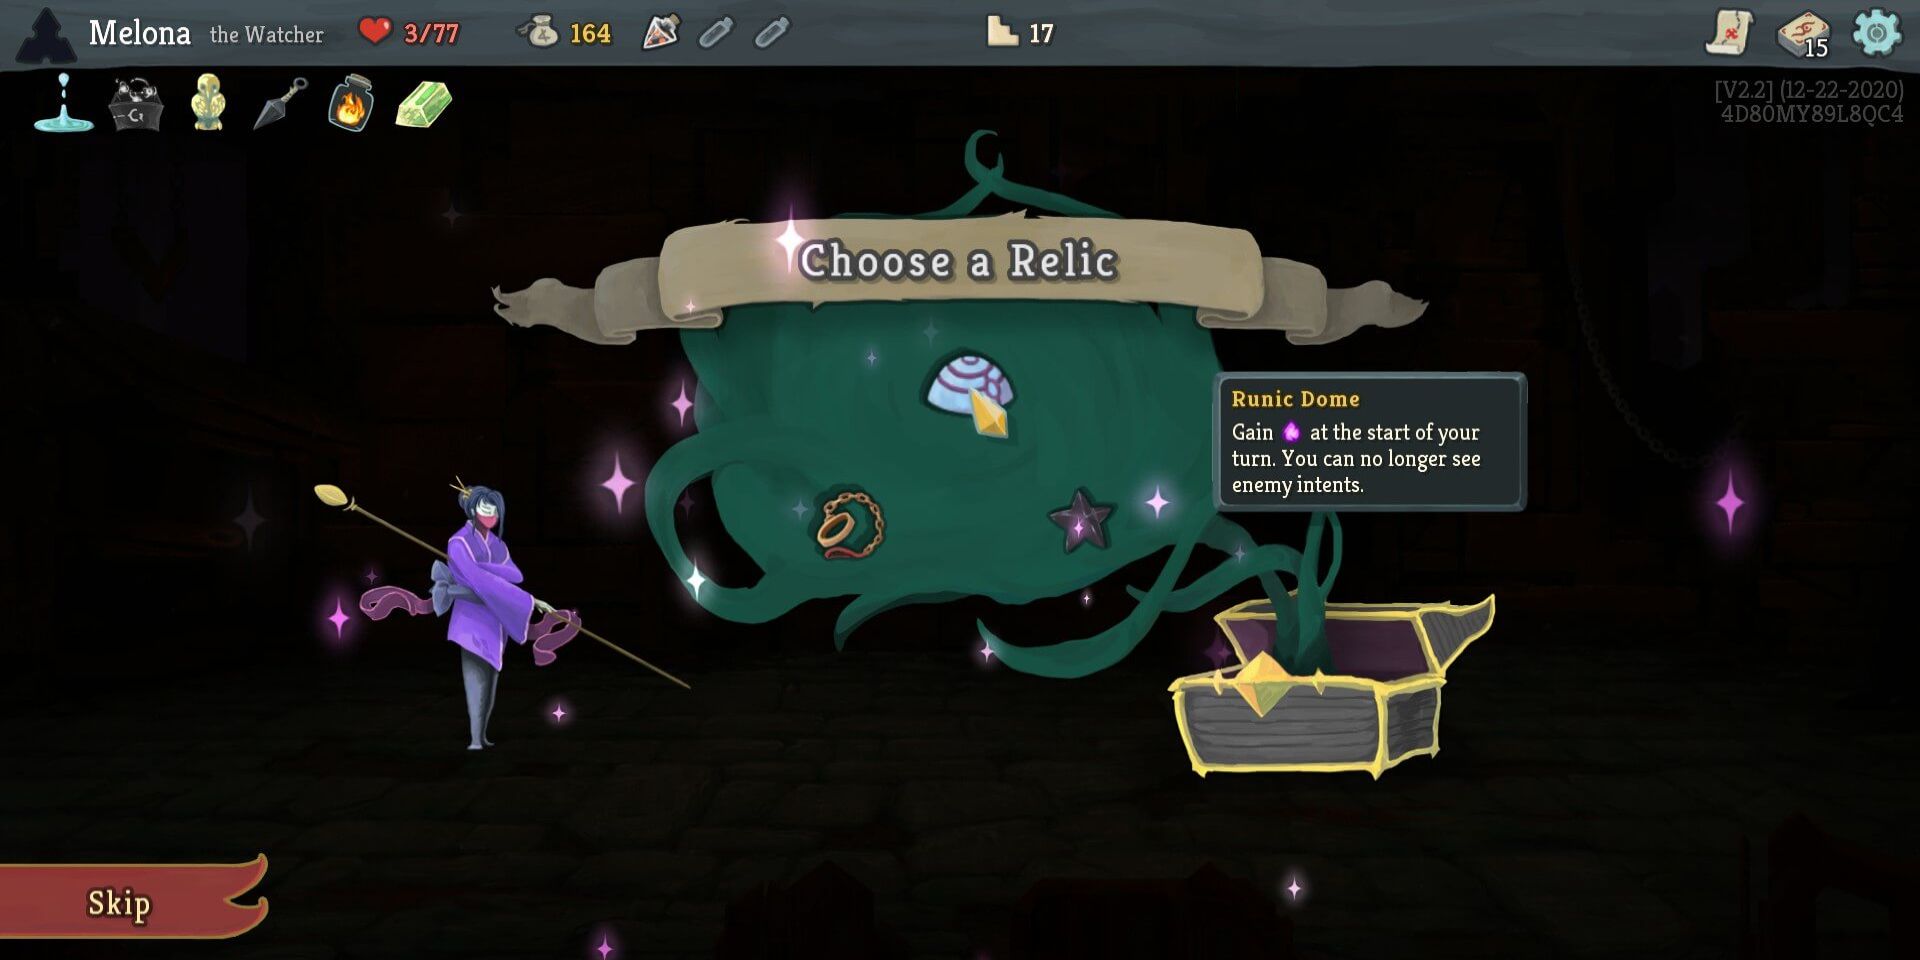 The relic menu screen featuring the Watcher in Slay the Spire.